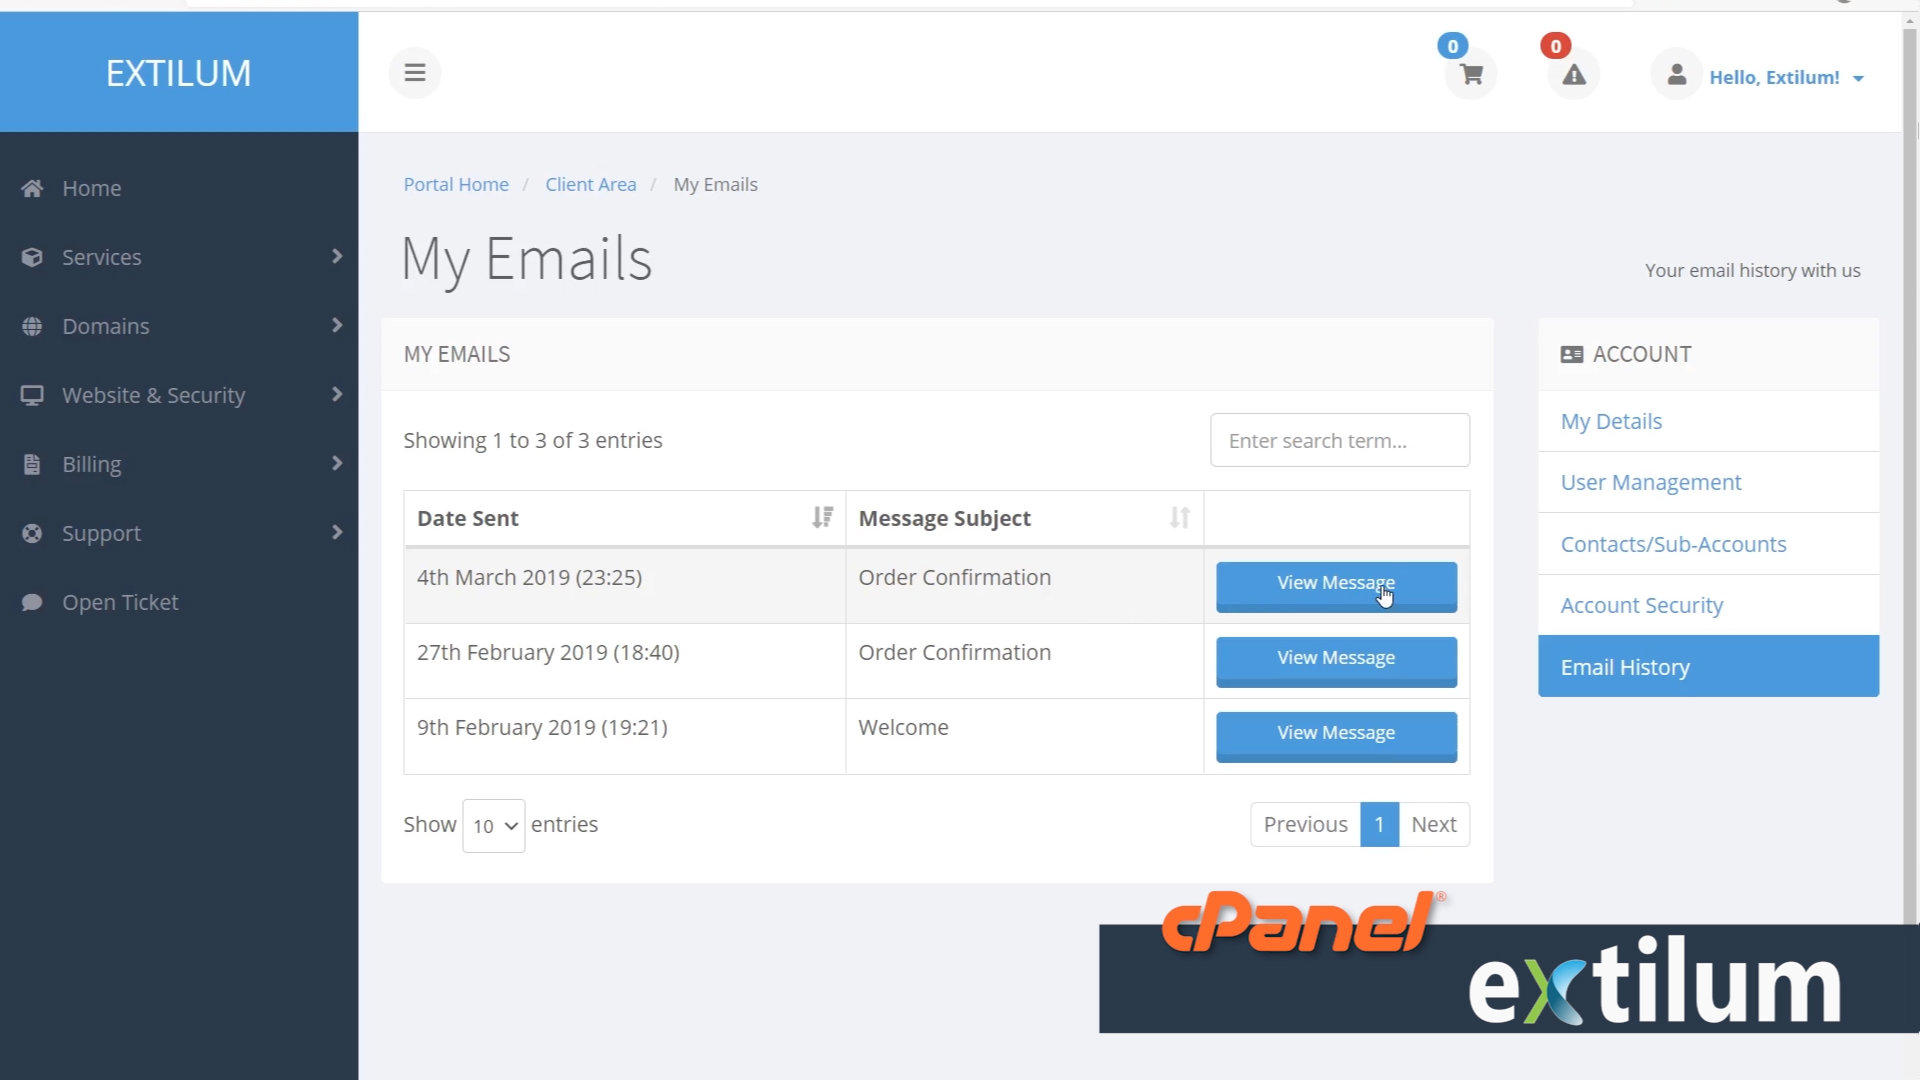 Extilum cPanel - View Email History